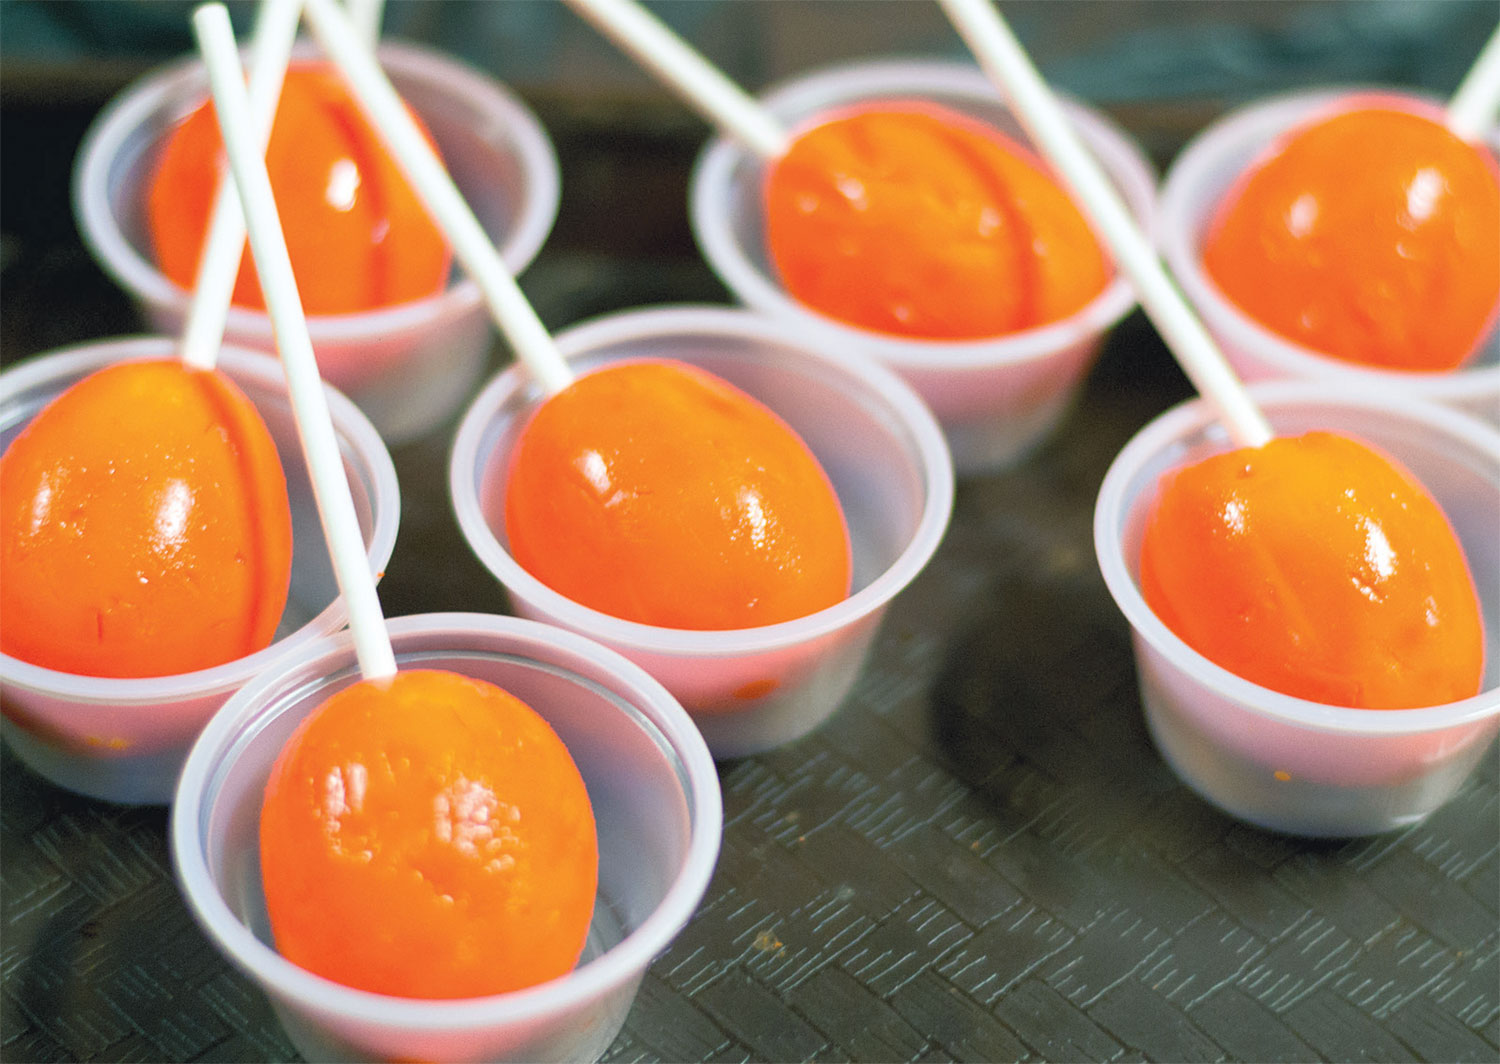 Hot pickled eggs are surprisingly craveable